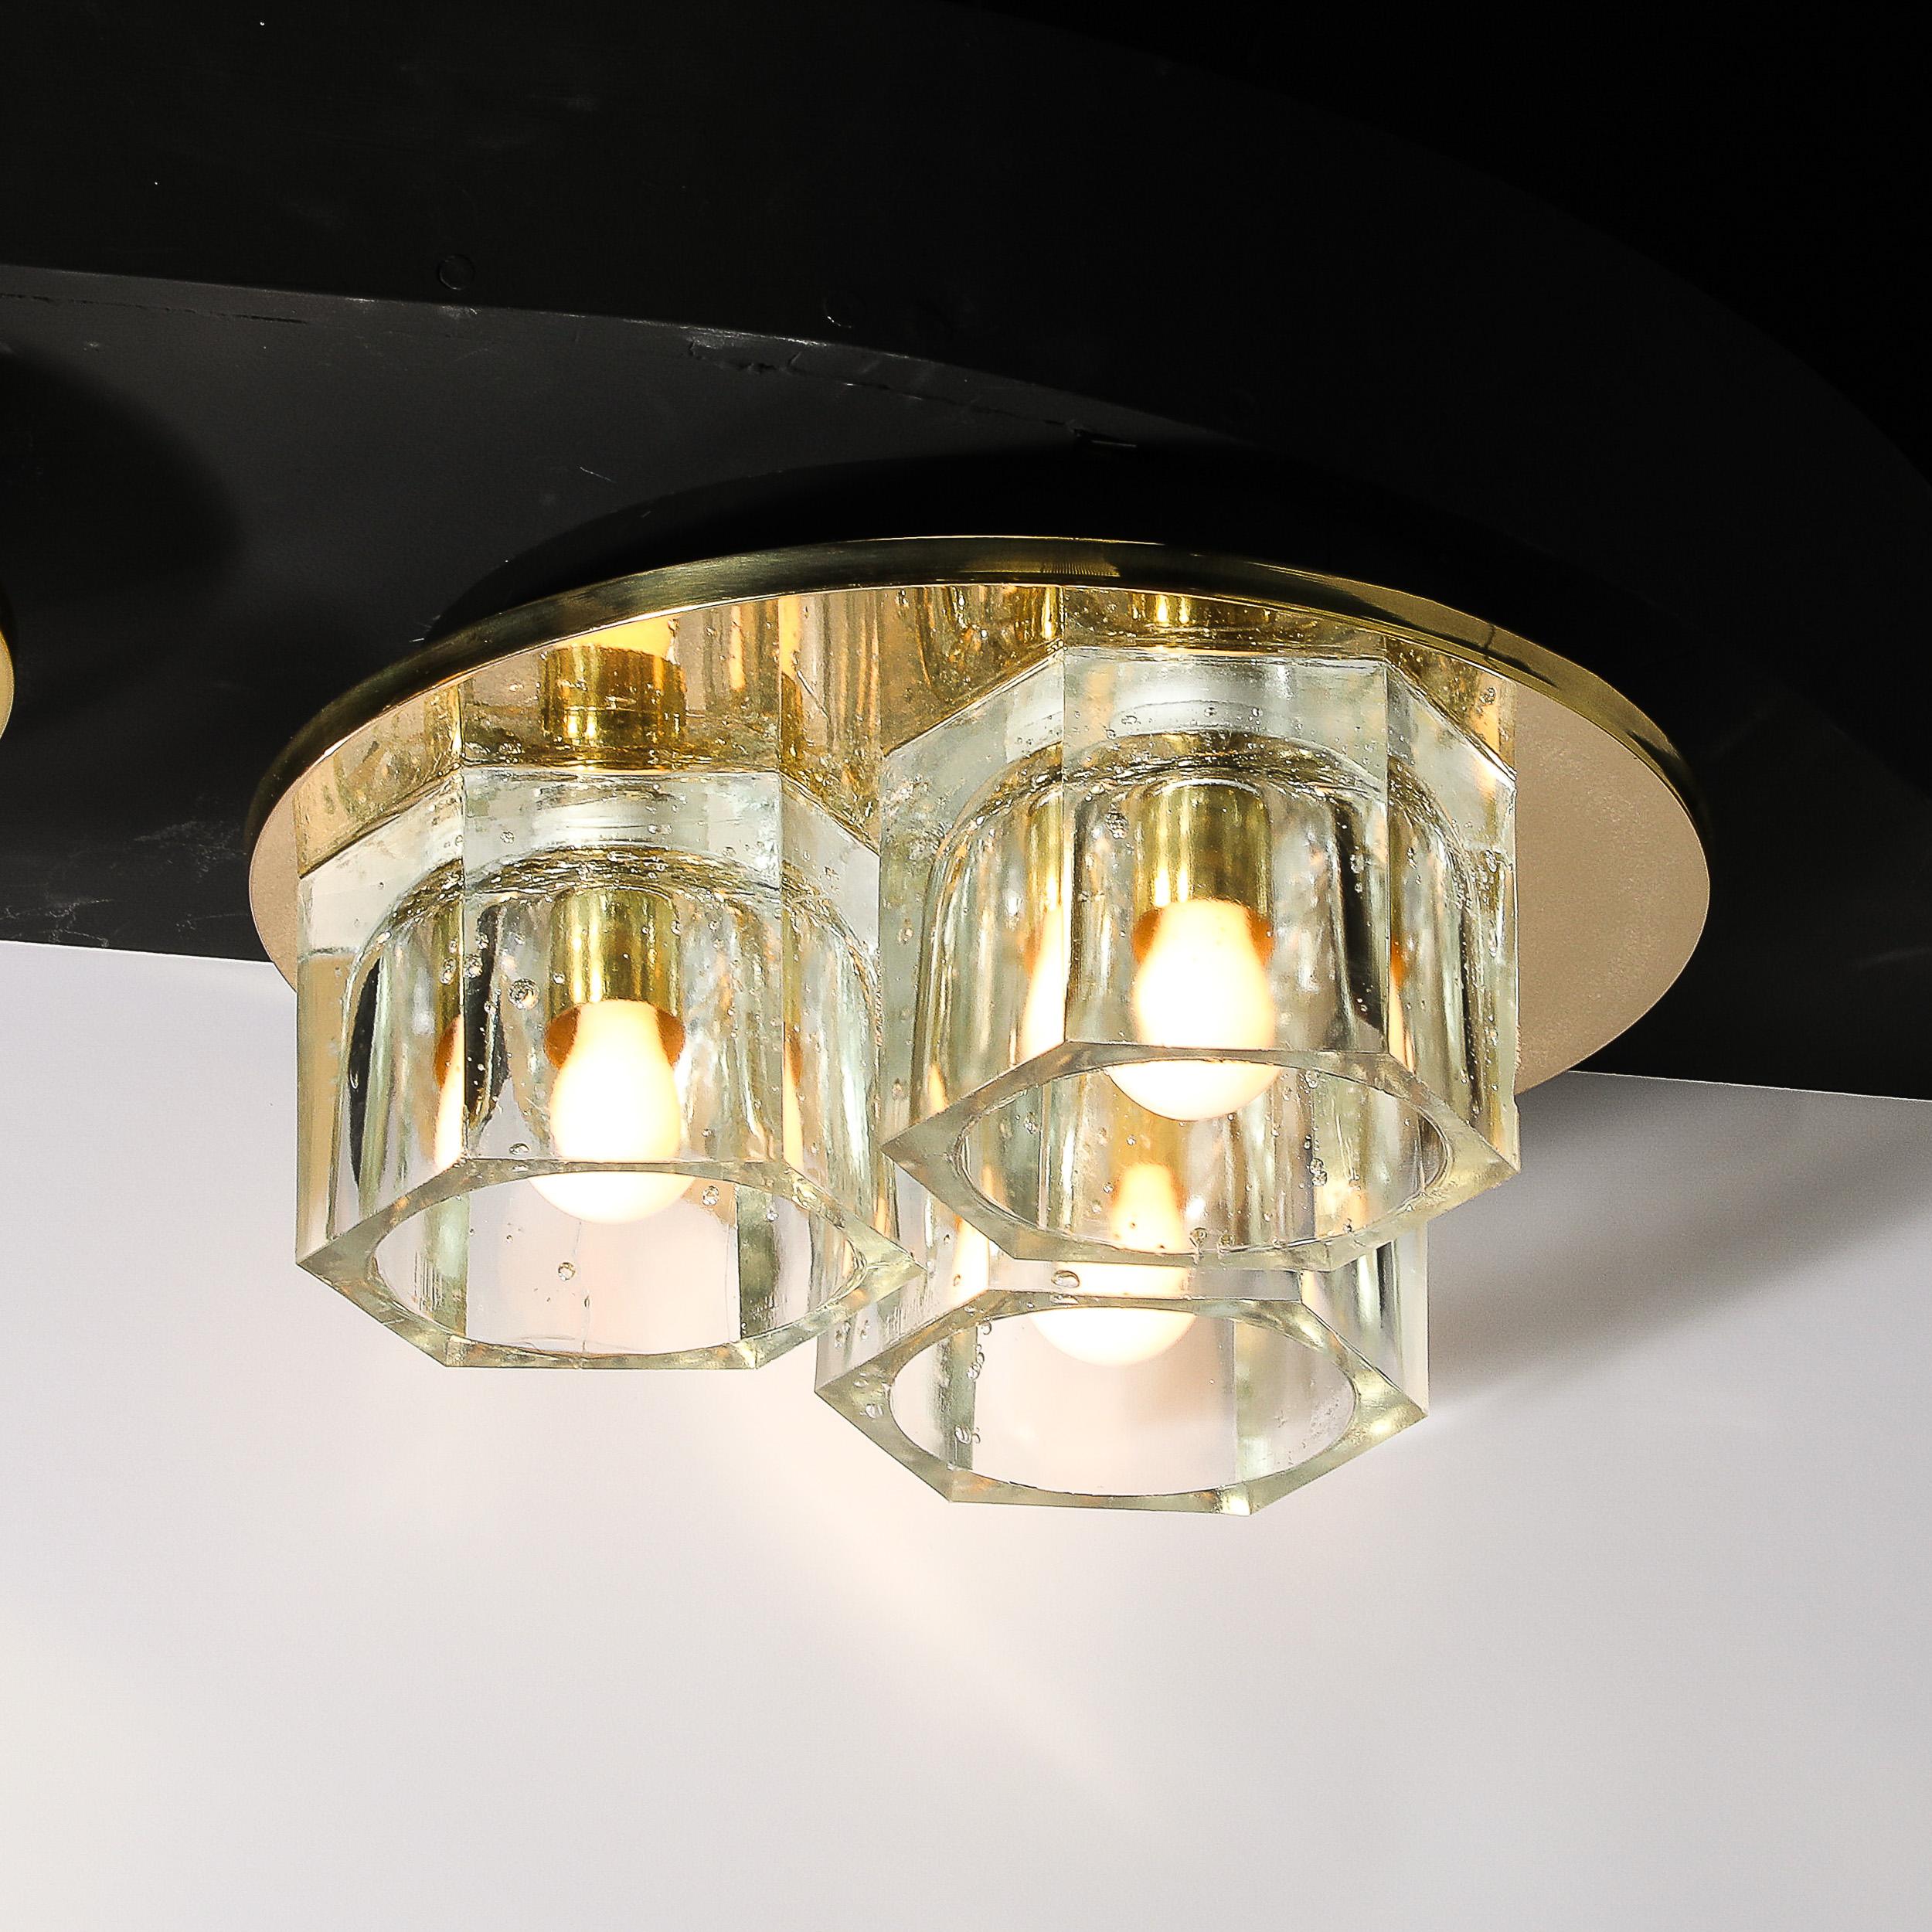 This lovely Mid-Century Modernist Hexagonal Three Shade Glass Flush Mount Chandelier W/Brass Fittings is by Lightolier and originates from the United States, Circa 1970. Features three hexagonal glass shades which house and diffuse the light of the